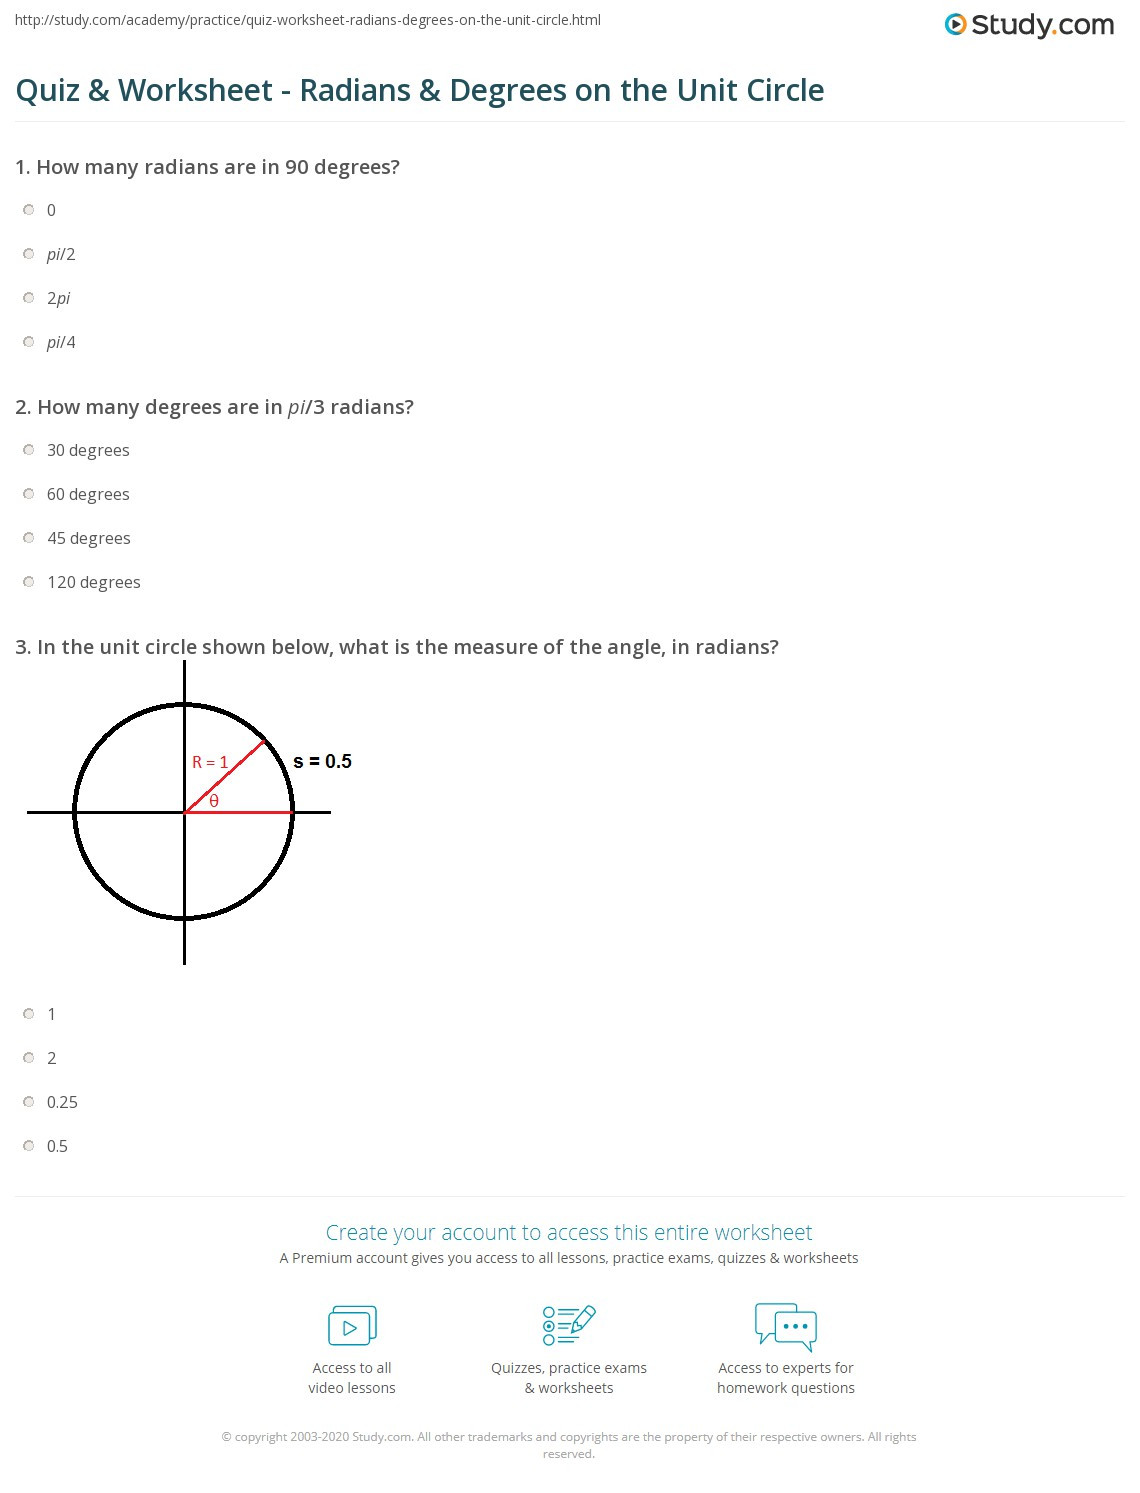 Unit Circle Worksheet with Answers Quiz &amp; Worksheet Radians &amp; Degrees On the Unit Circle